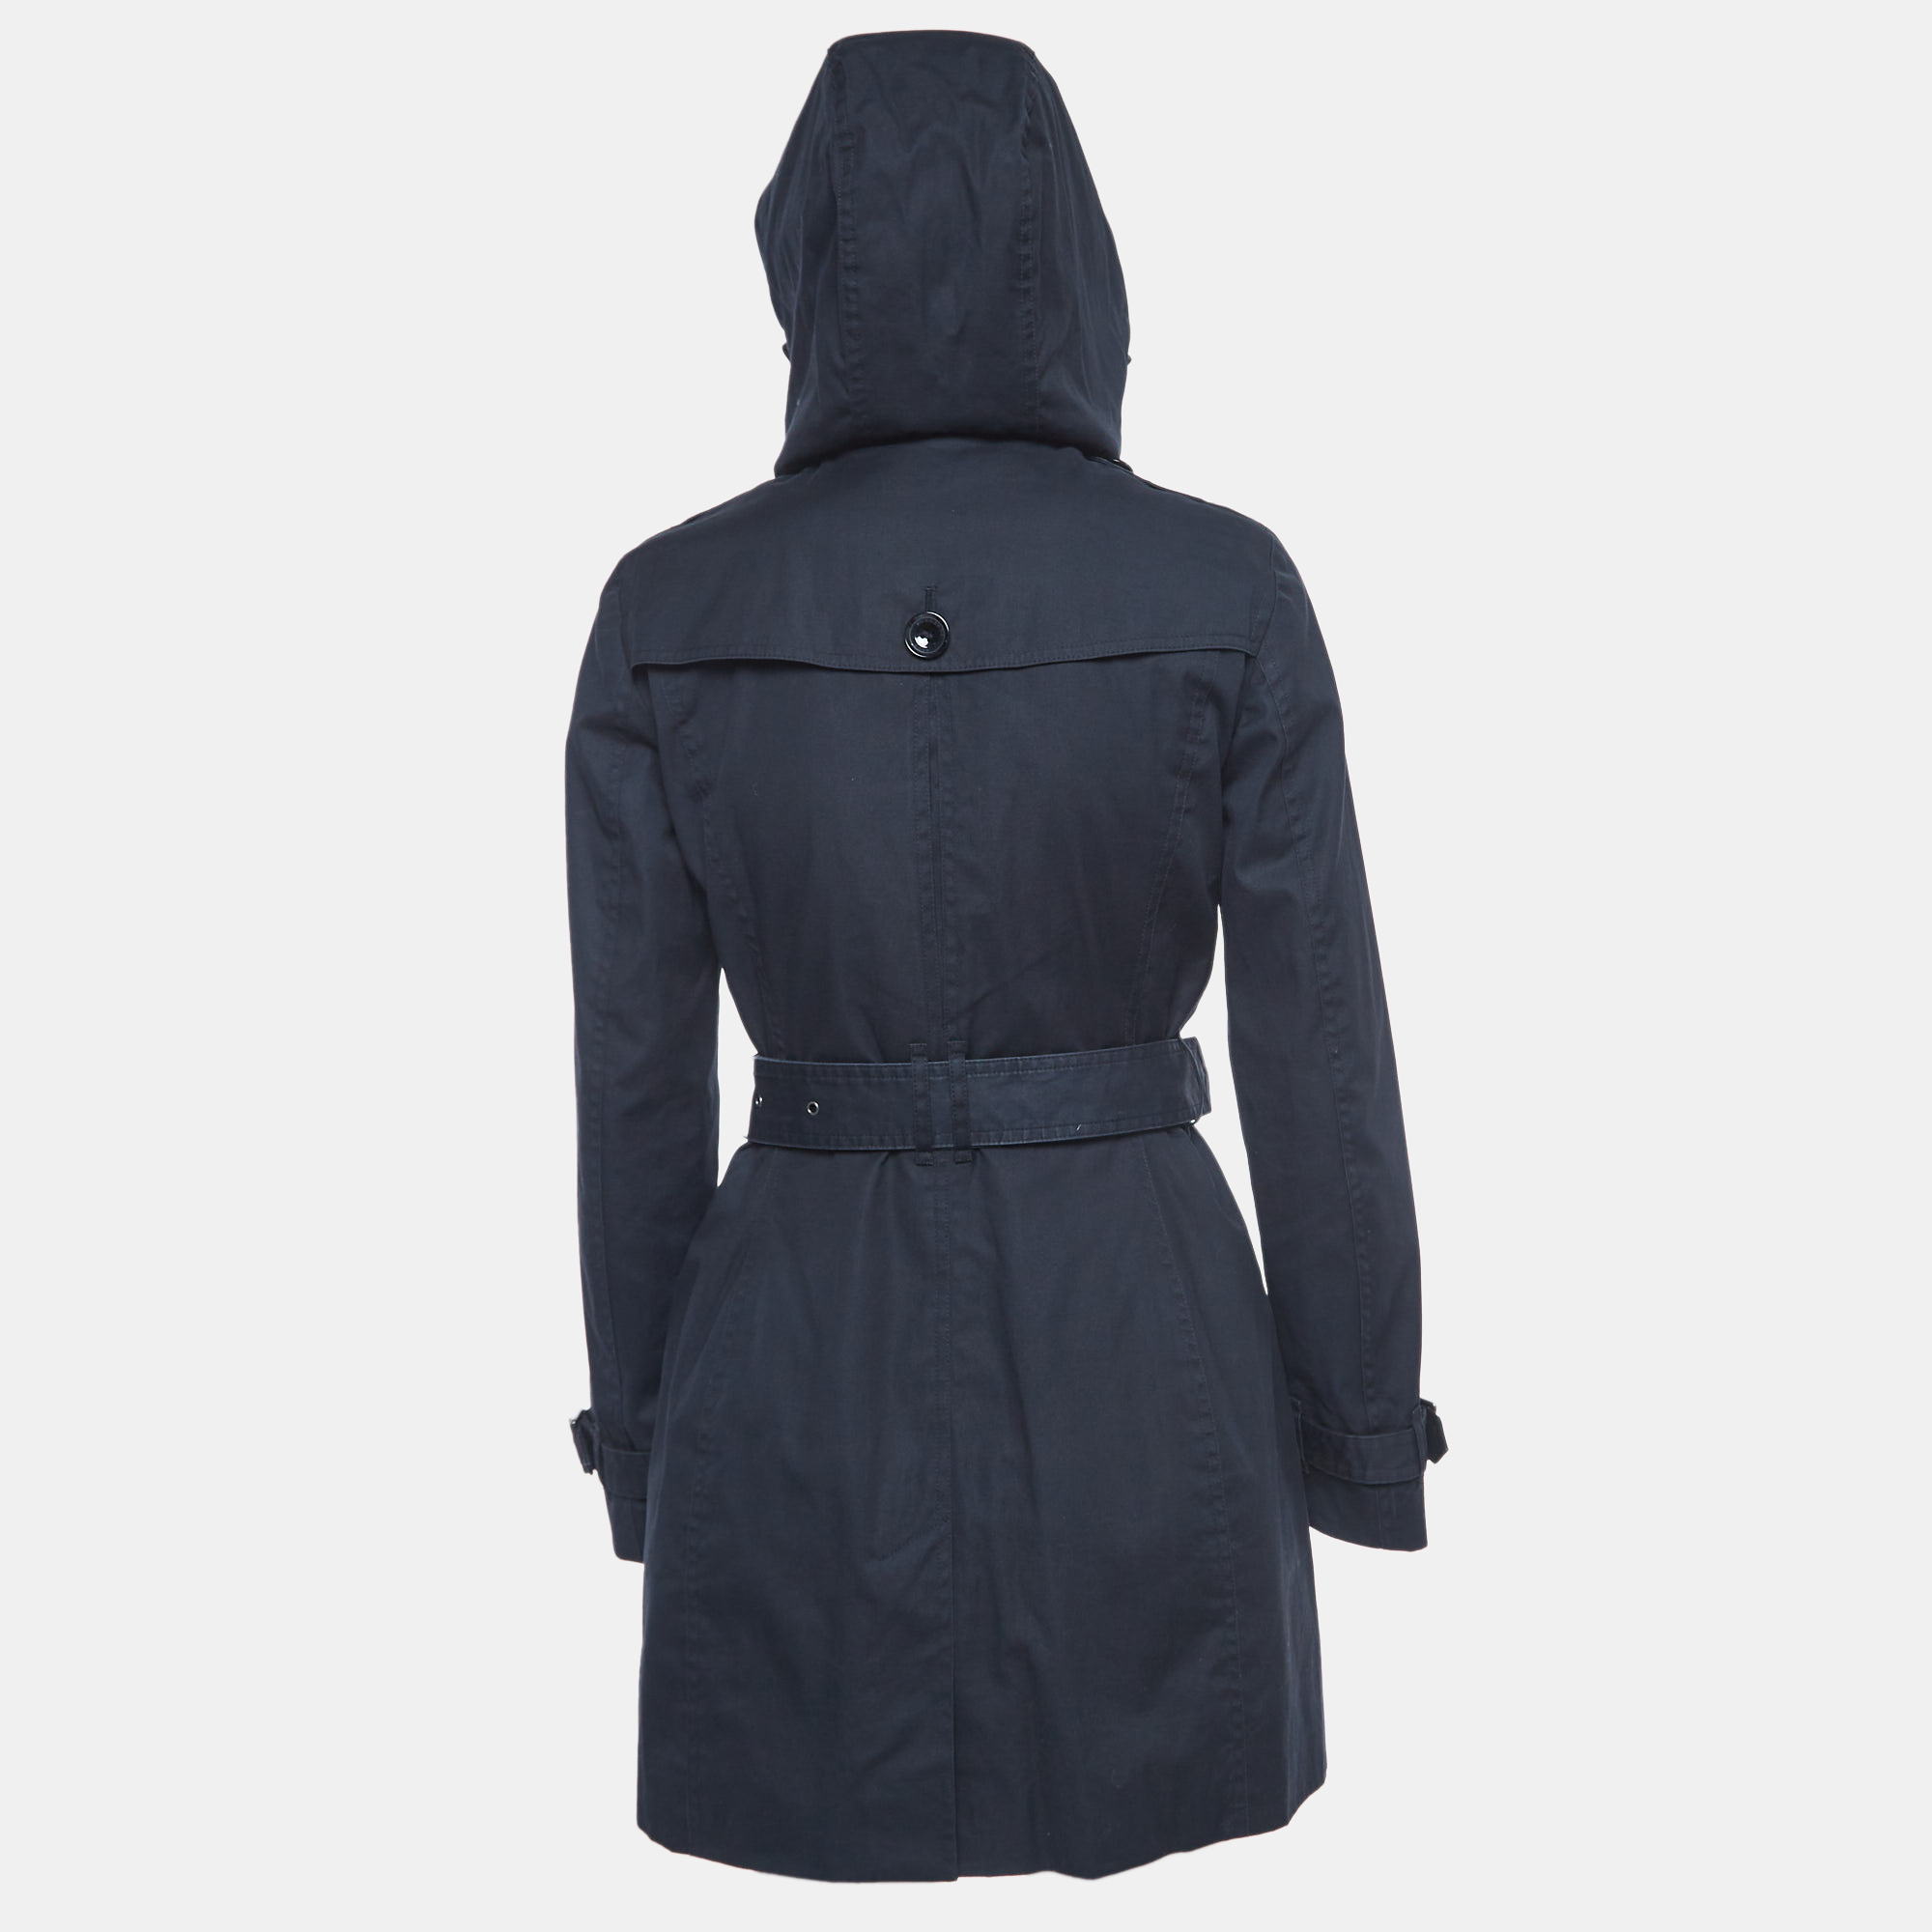 Burberry Brit Navy Blue Double Breasted Trench Coat S